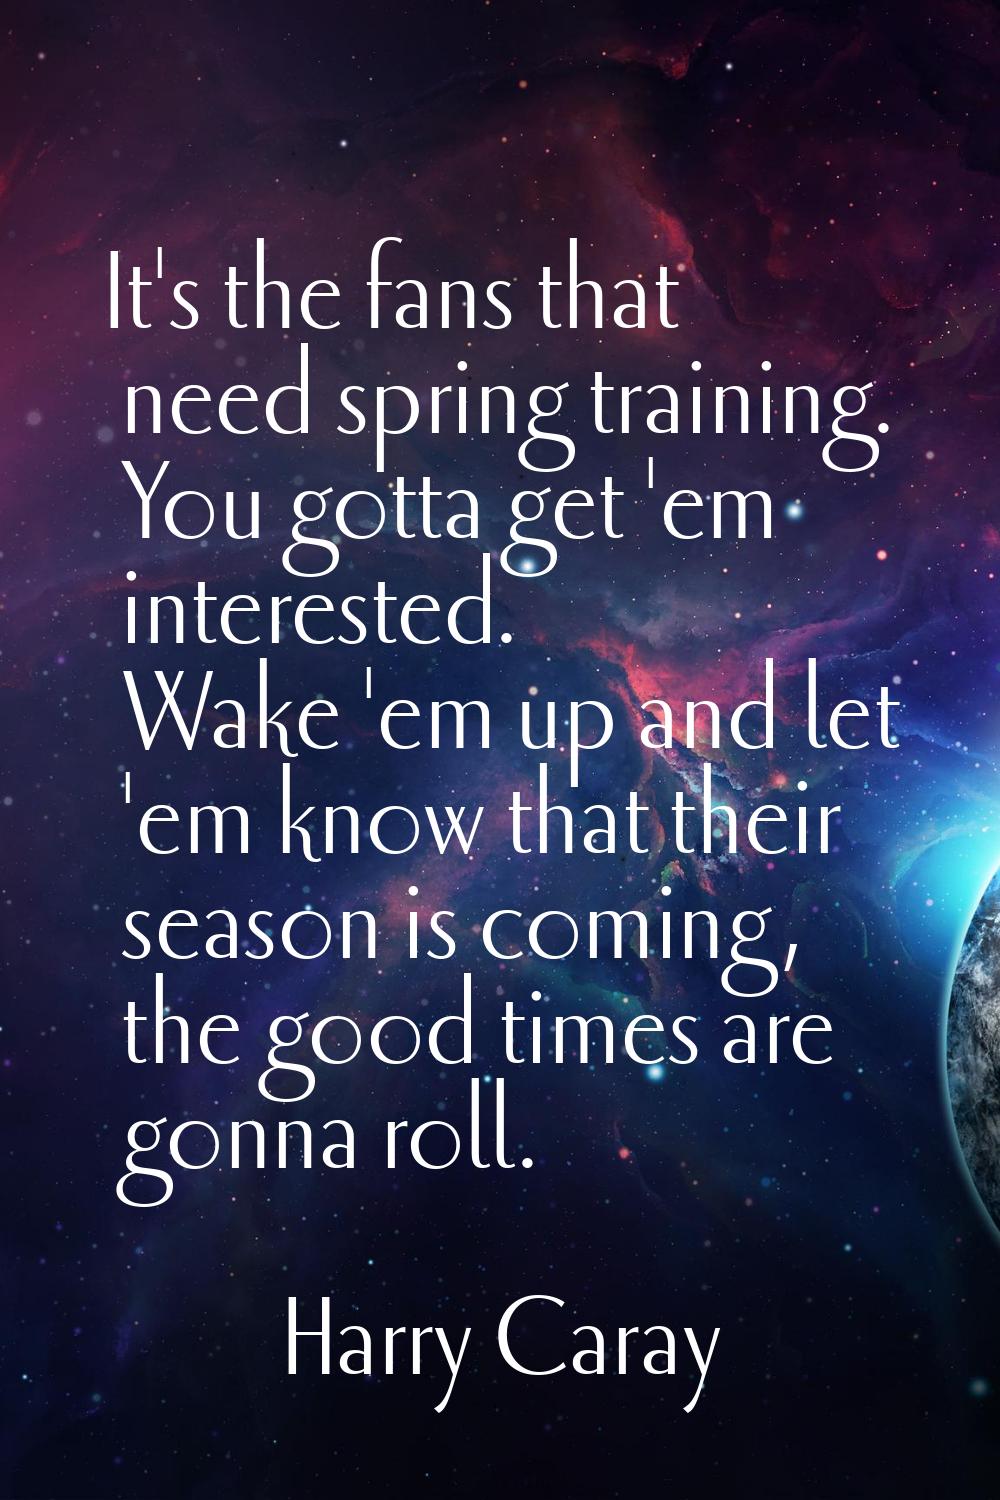 It's the fans that need spring training. You gotta get 'em interested. Wake 'em up and let 'em know